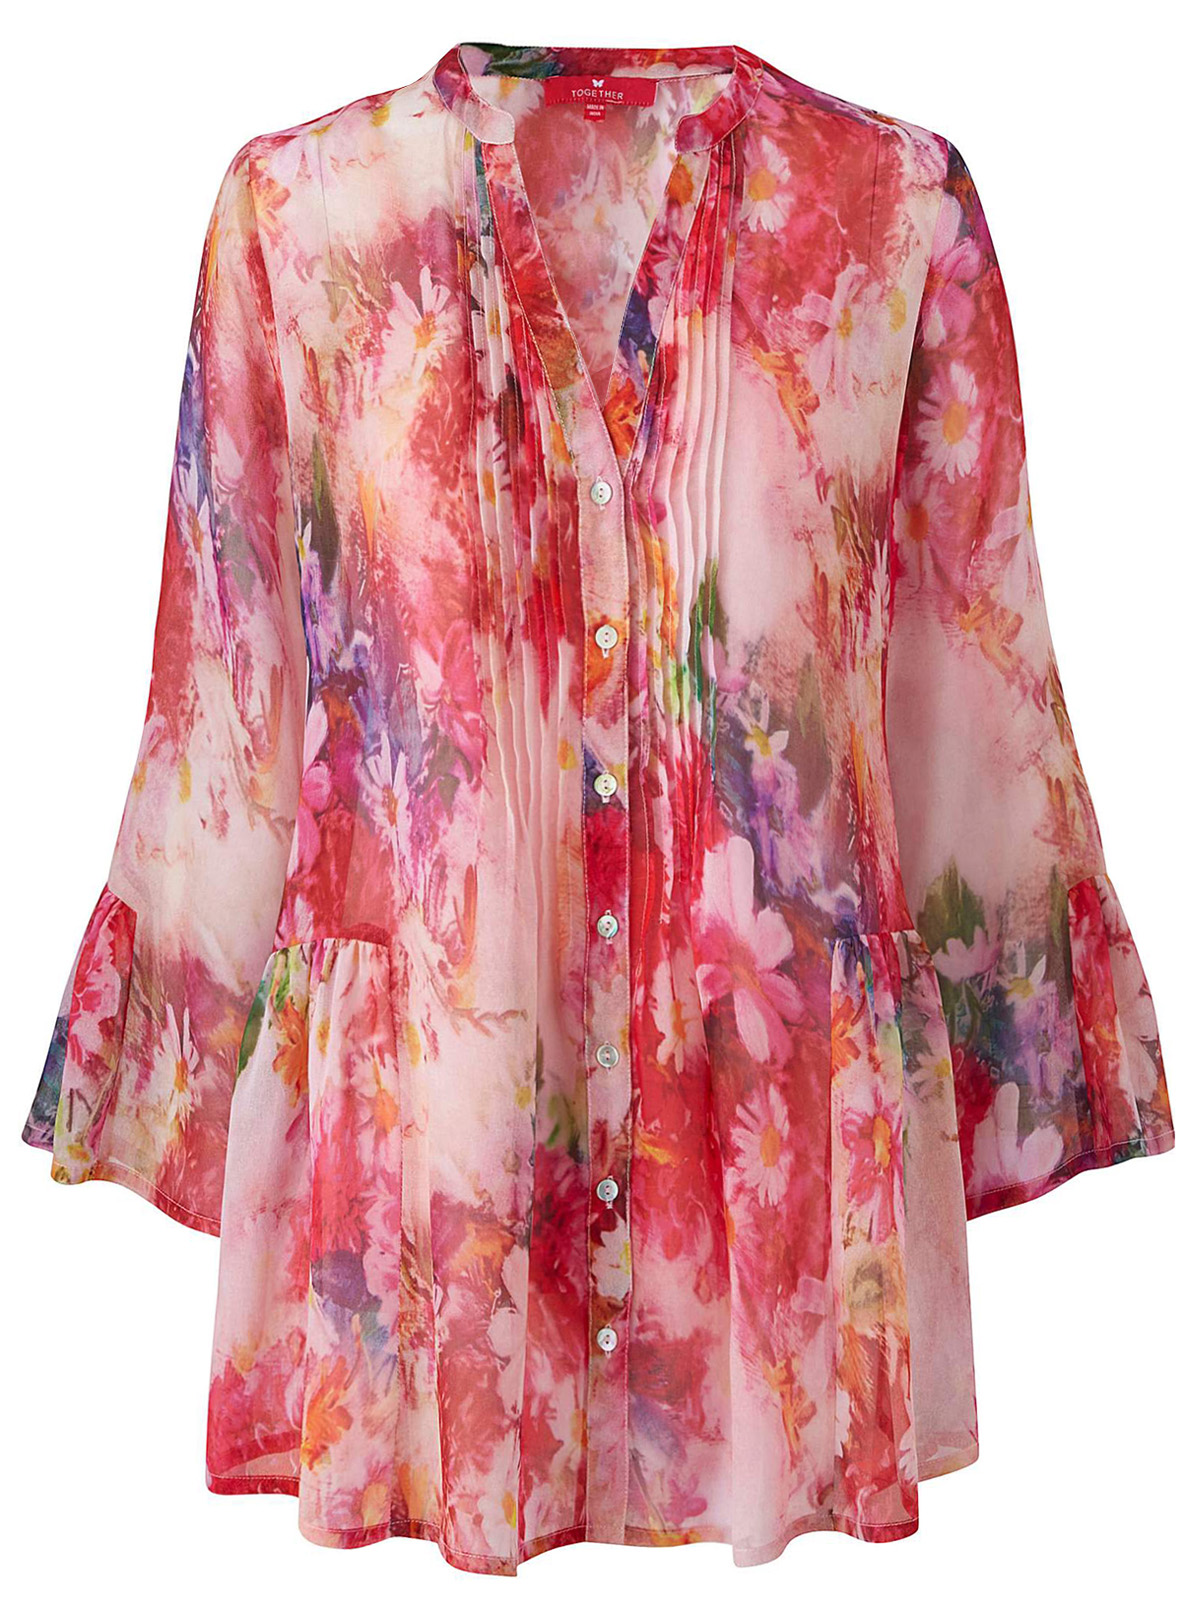 Together PINK Floral Print Georgette Blouse - Plus Size 16 to 20